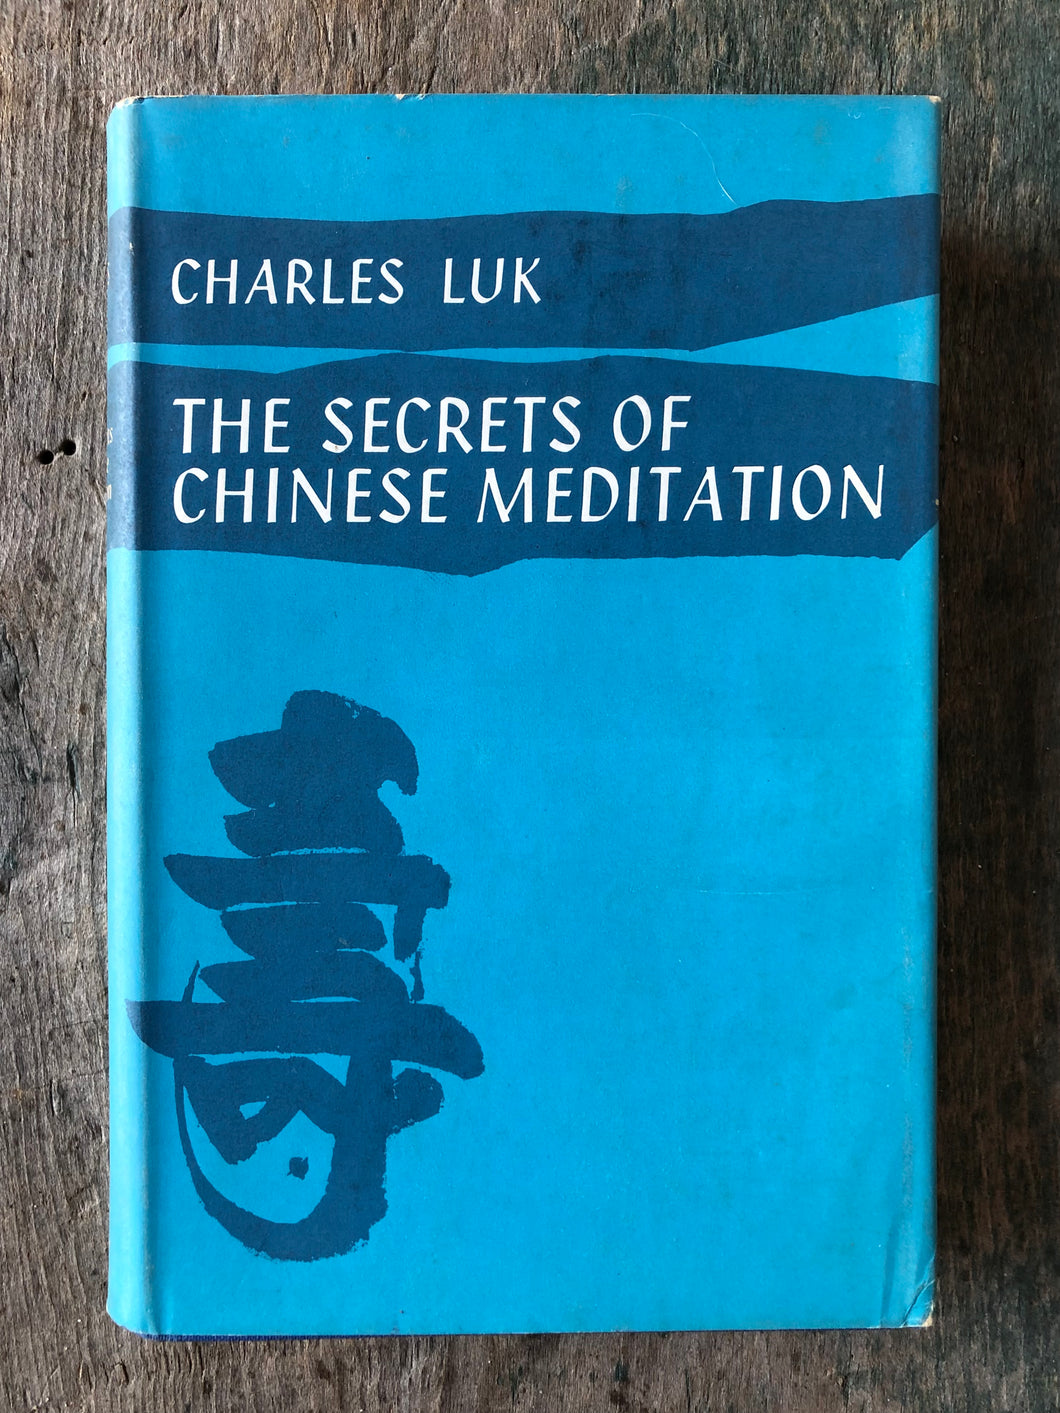 The Secrets of Chinese Meditation: Self-cultivation by Mind Control as taught in the Ch'an, Mahayana and Taoist schools of China by Charles Luke (Lu K'uan You)